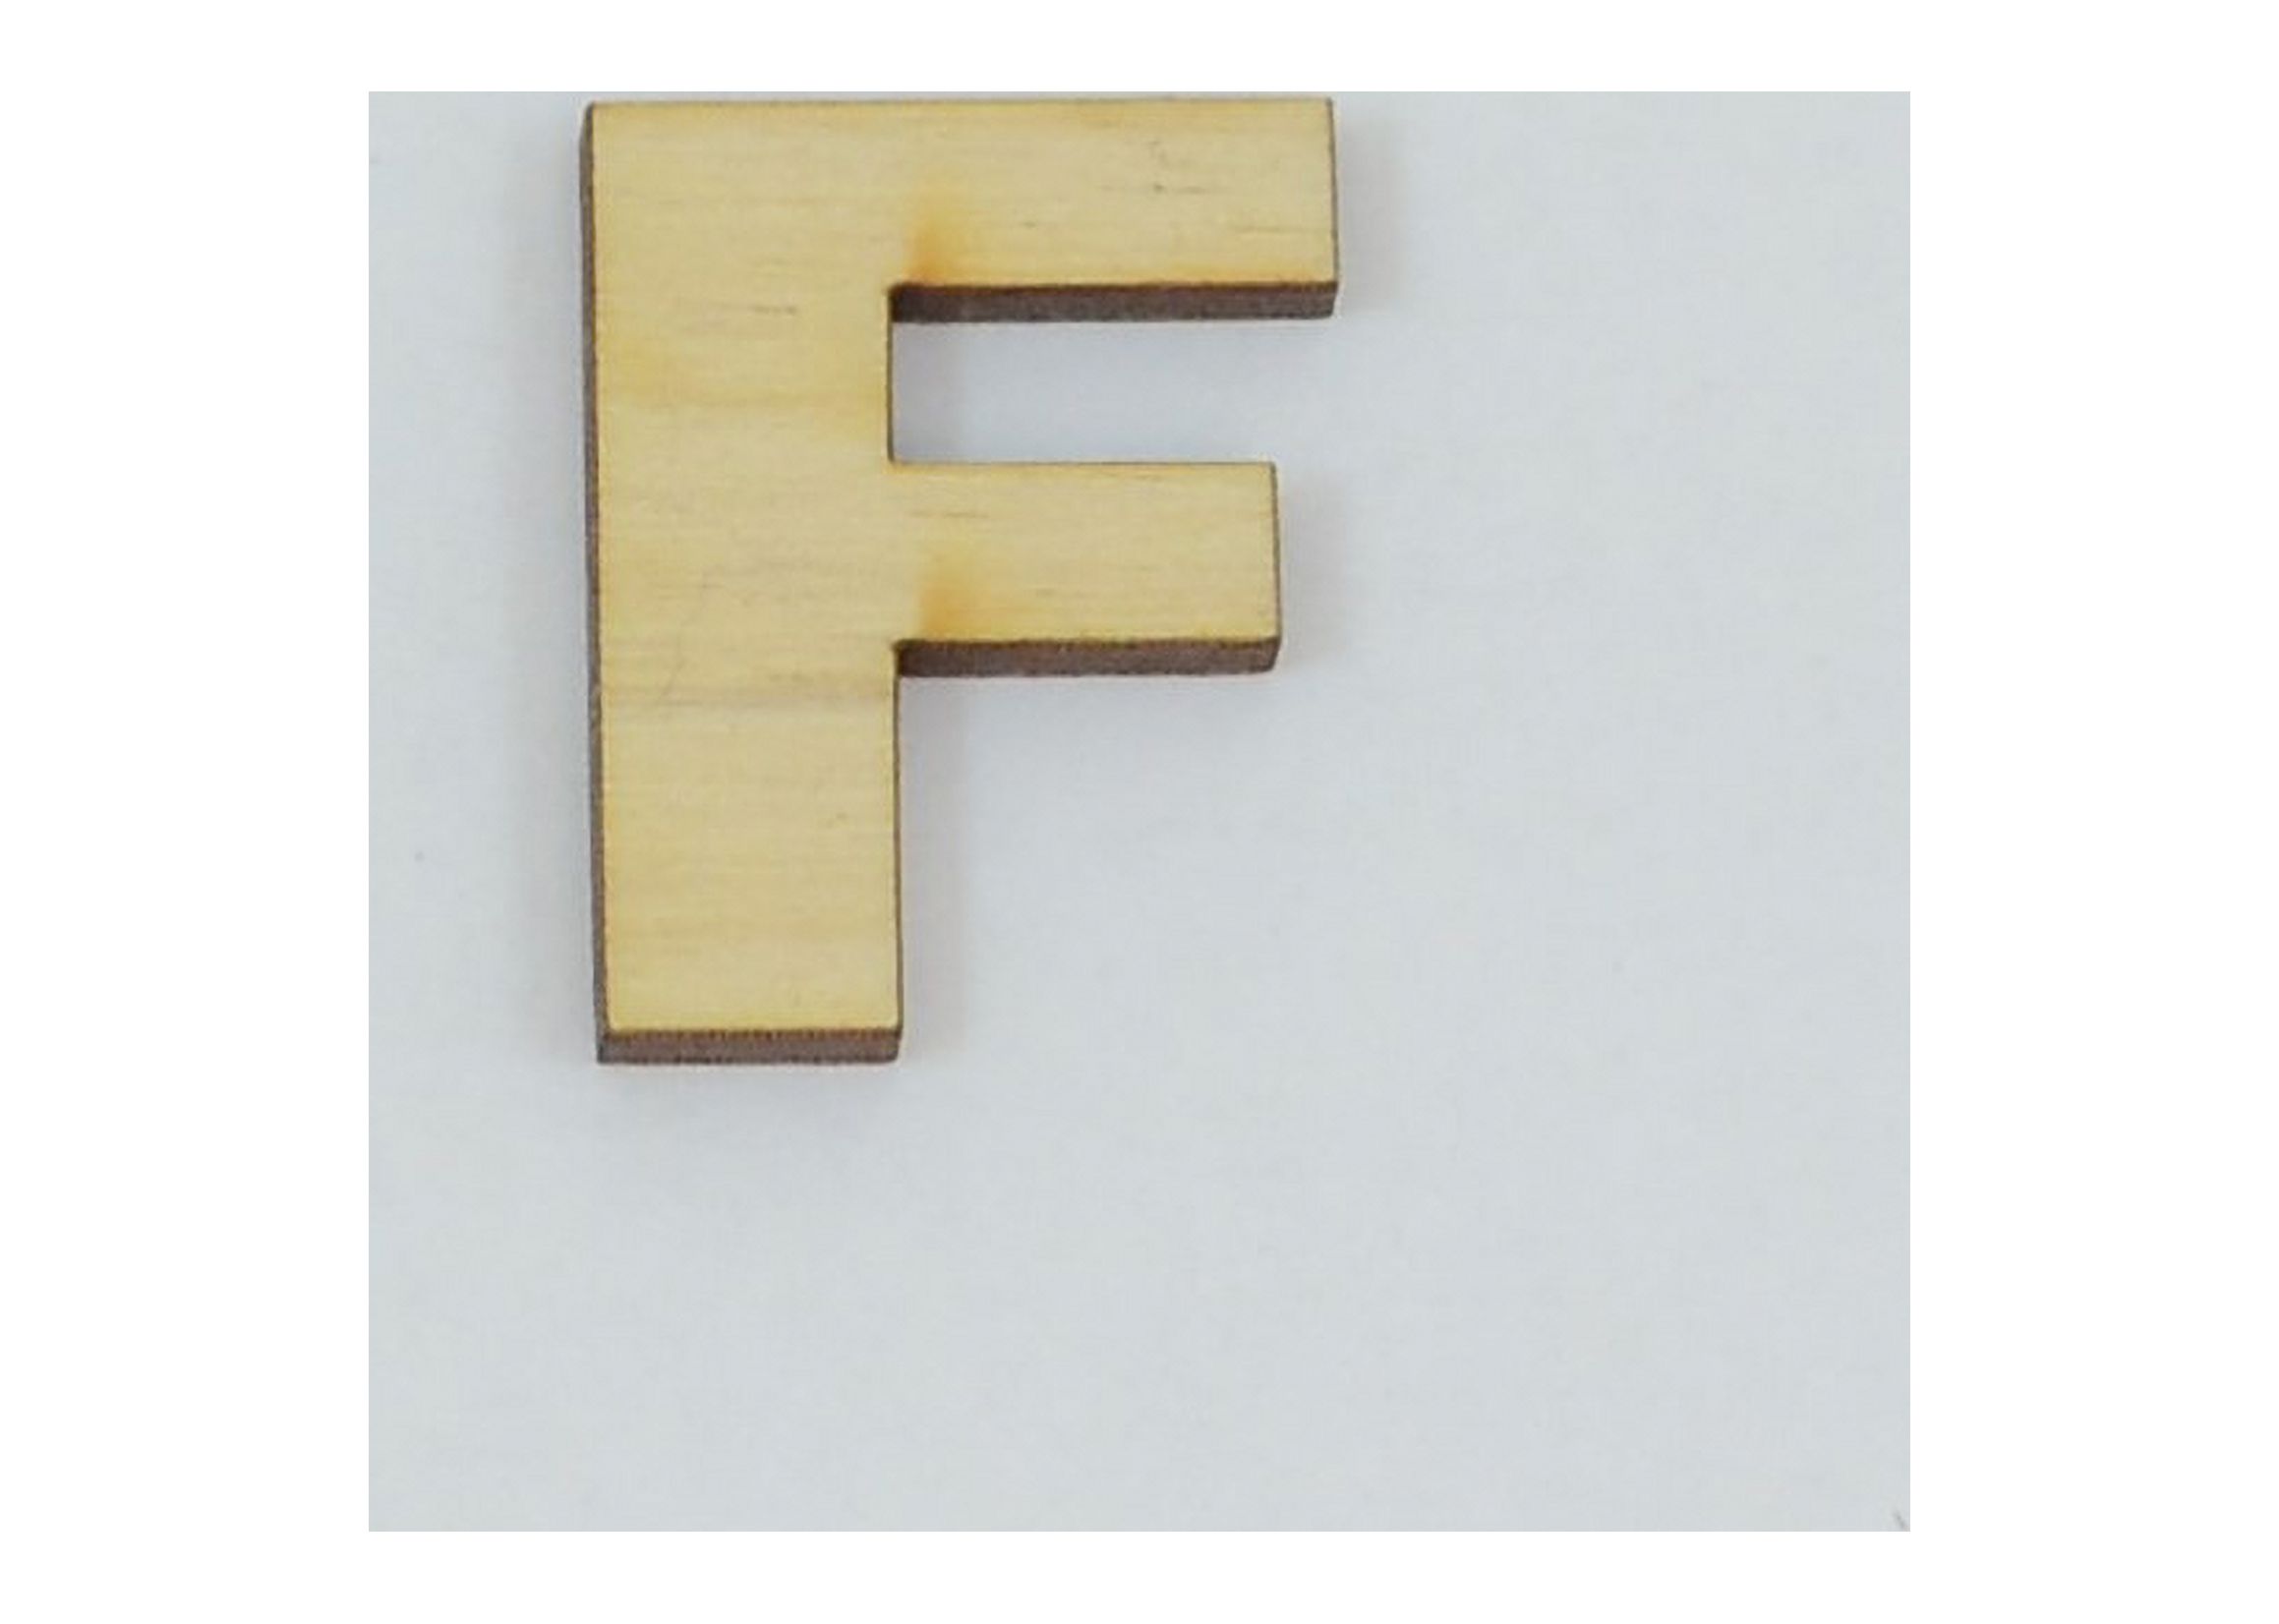 1 Pc, 12 Inch X 1/8 Inch Thick Wood Letters F In The Arial Font For Craft Project & Different Decor - image 1 of 3